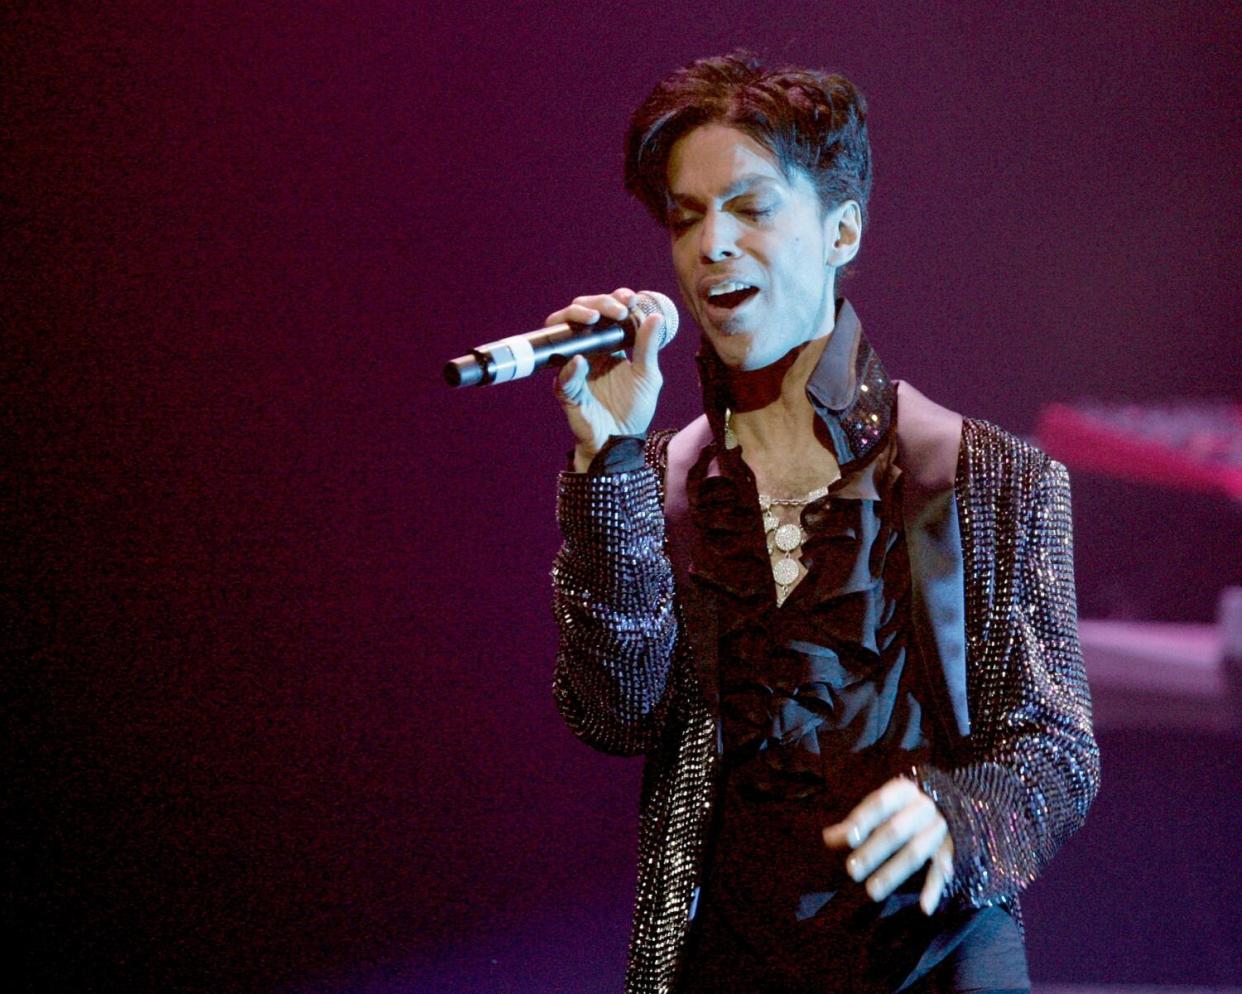 Prince performing at the Conga Room in 2009.